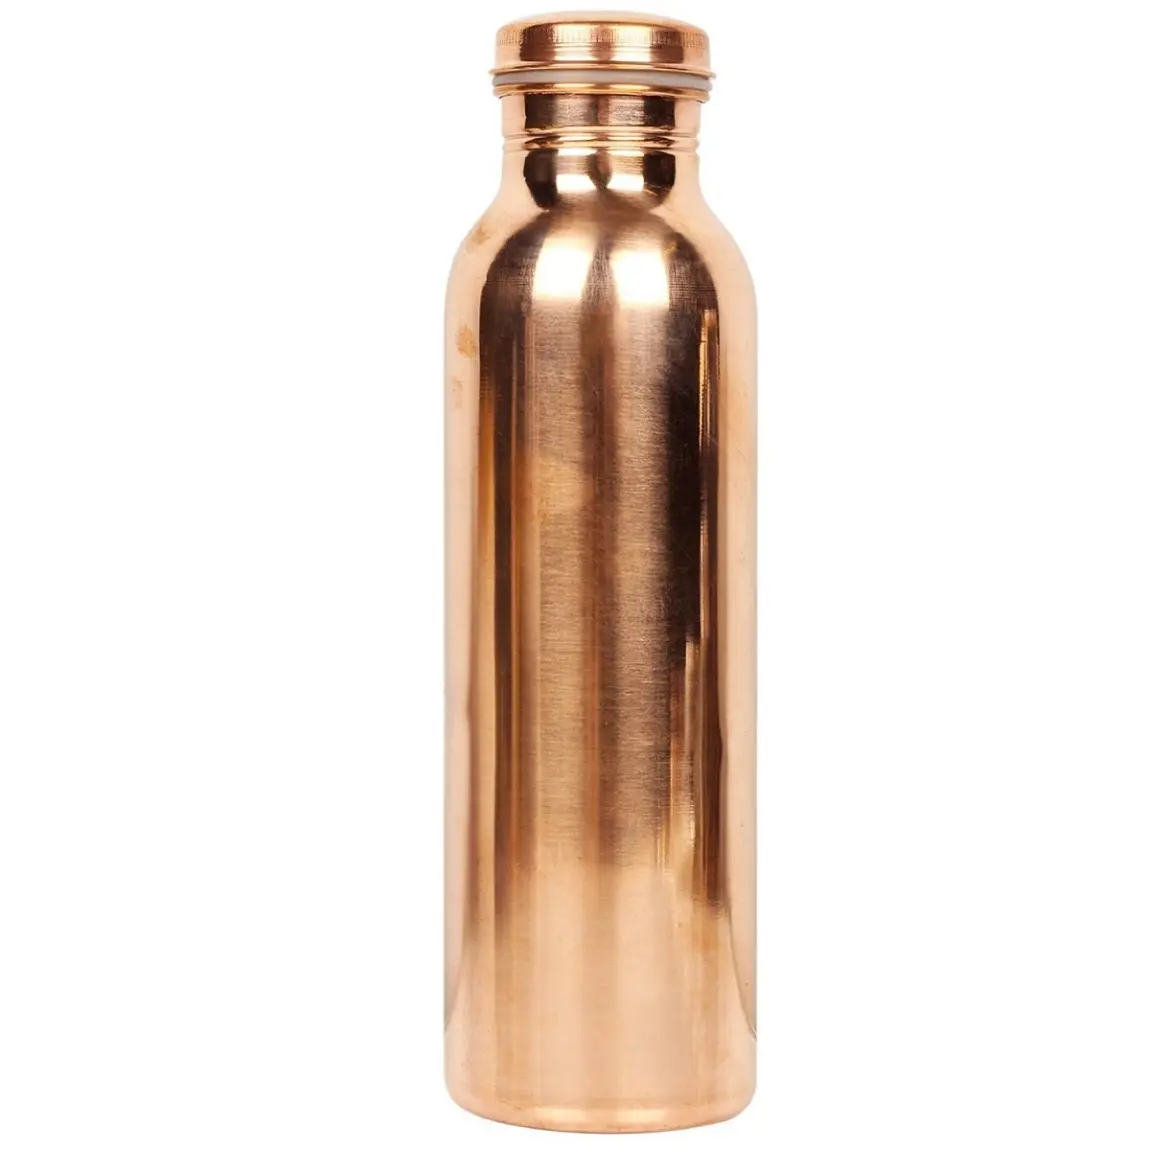 Standard Quality Pure Copper Sublimation Water Bottle for Water Keeping from Indian Manufacturer and Supplier